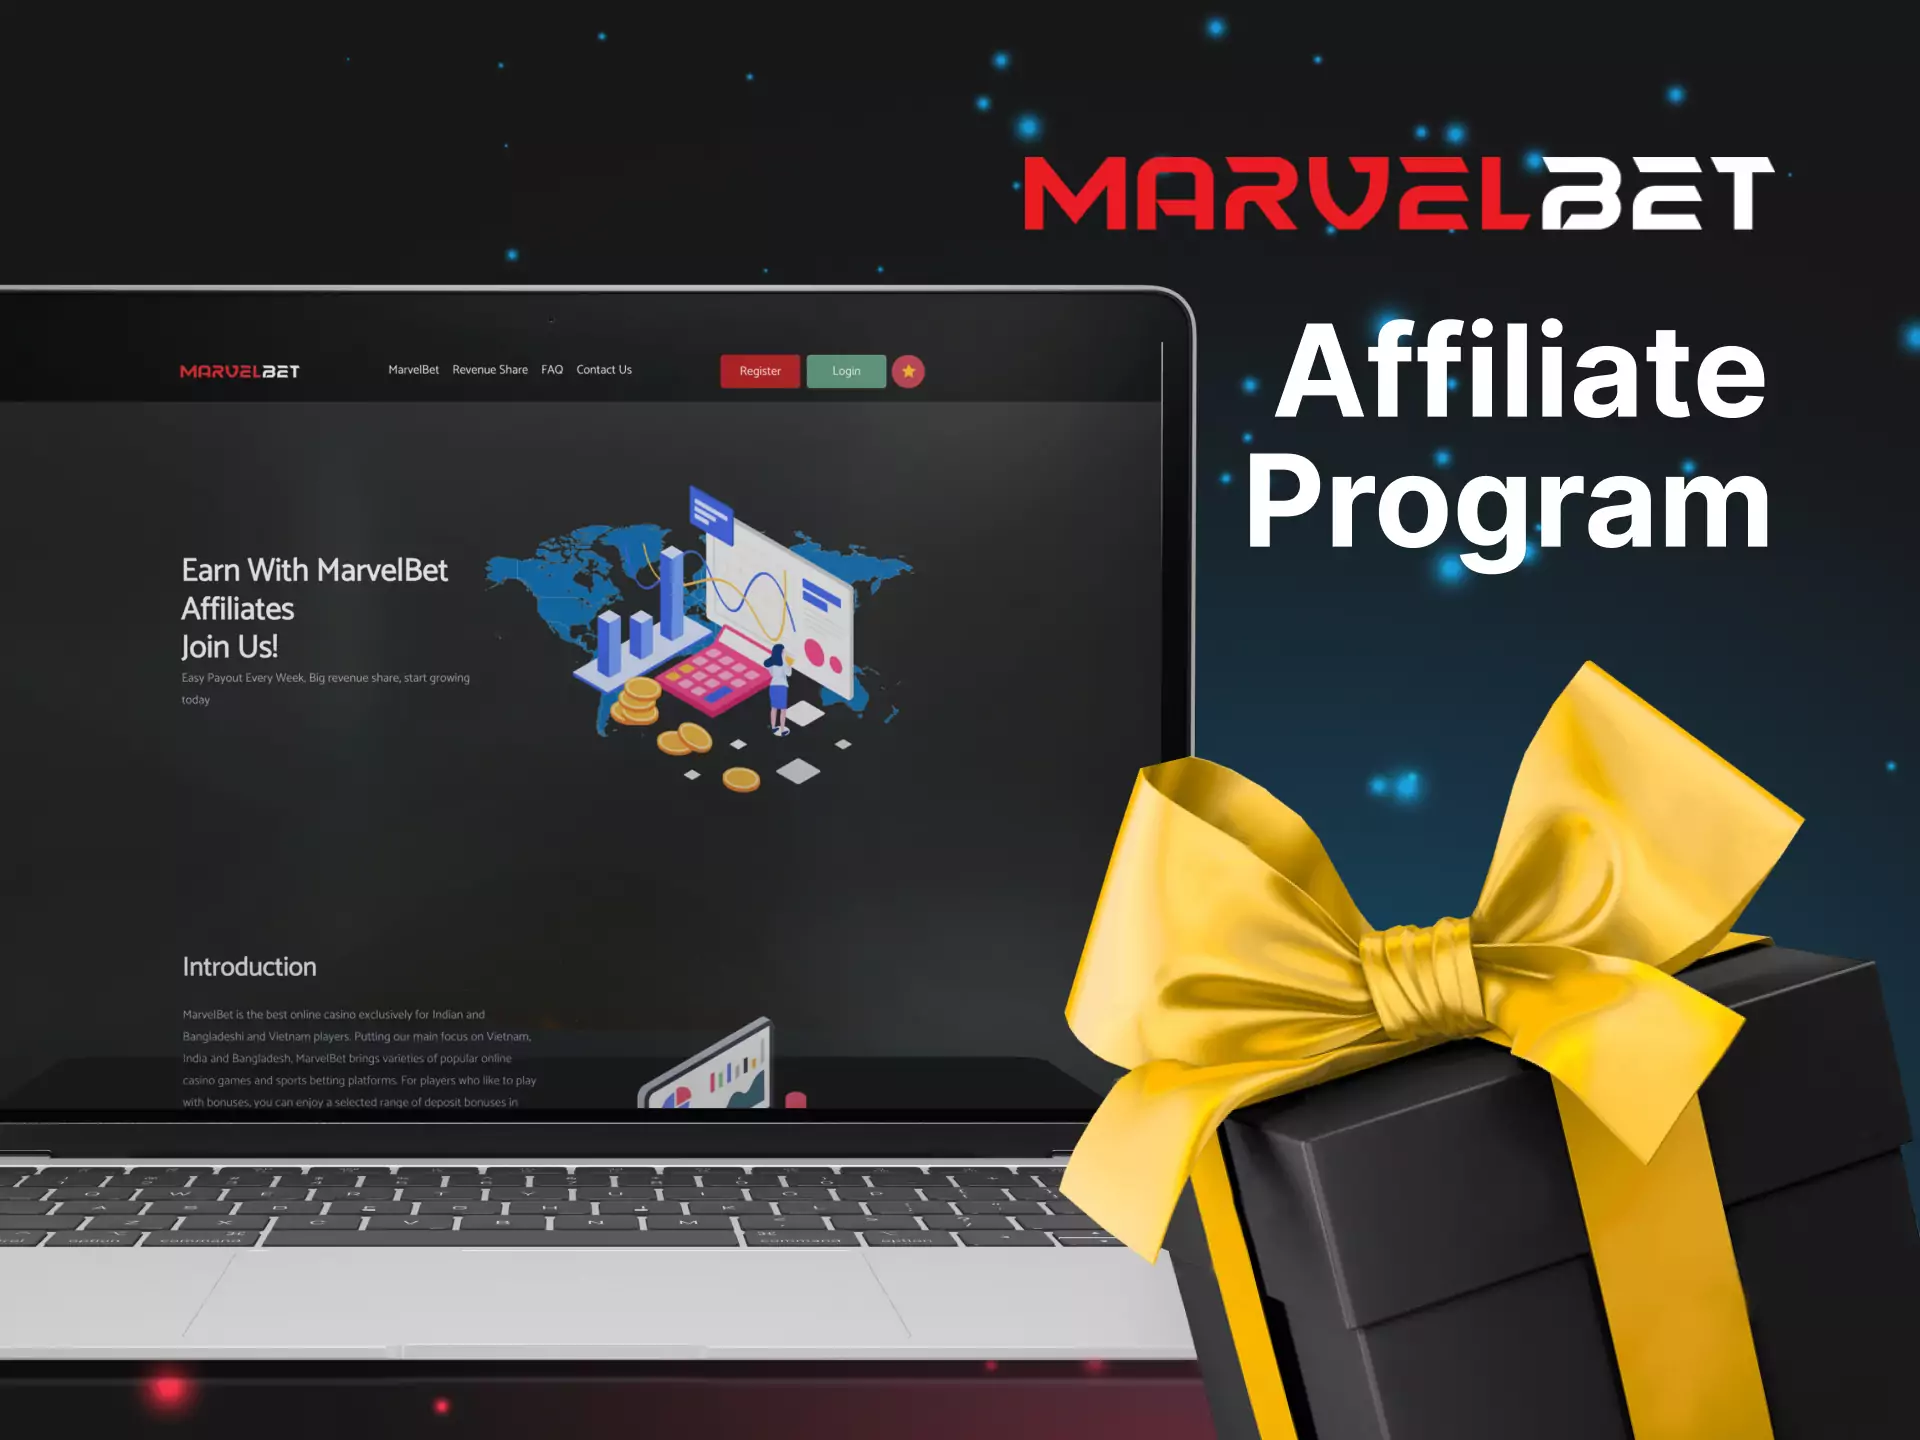 You can join the Marvelbet affiliate program to increase your profit from using the site.